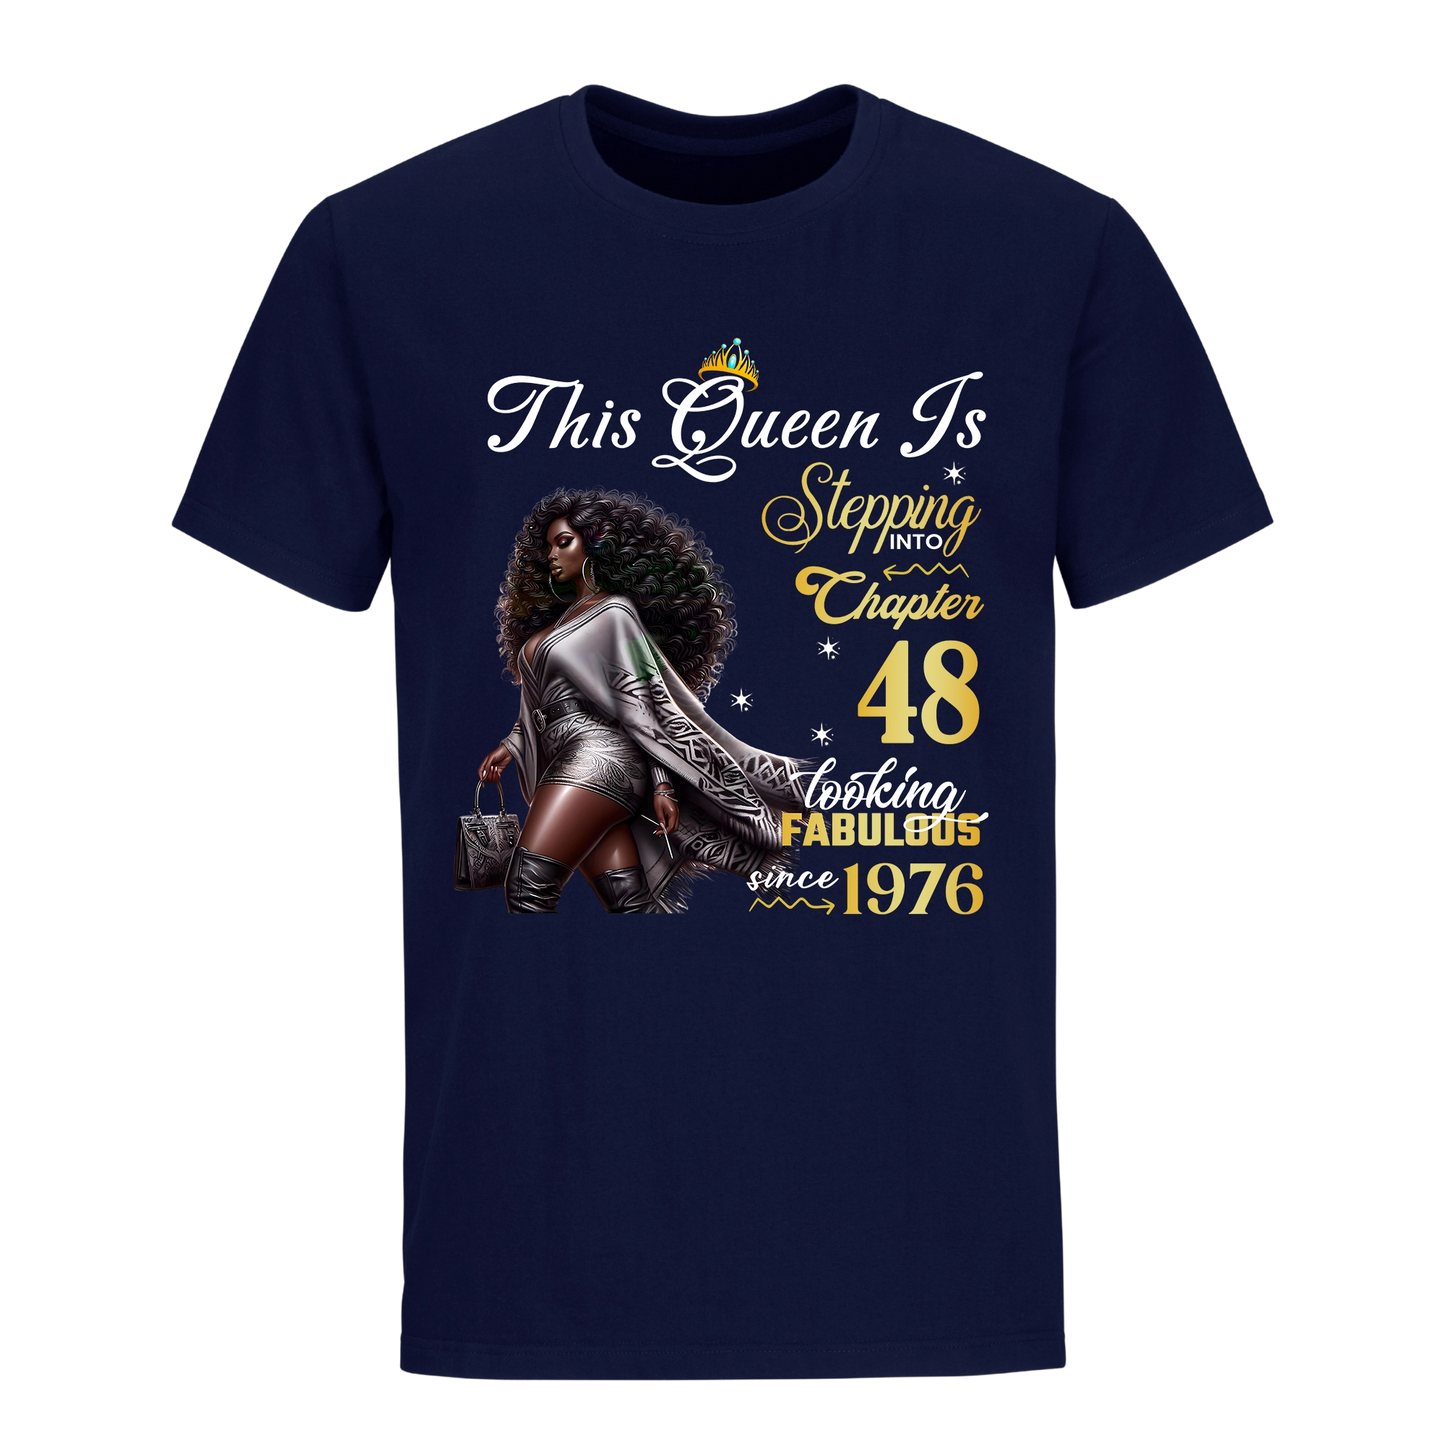 THIS QUEEN IS FABULOUS 48 UNISEX SHIRT